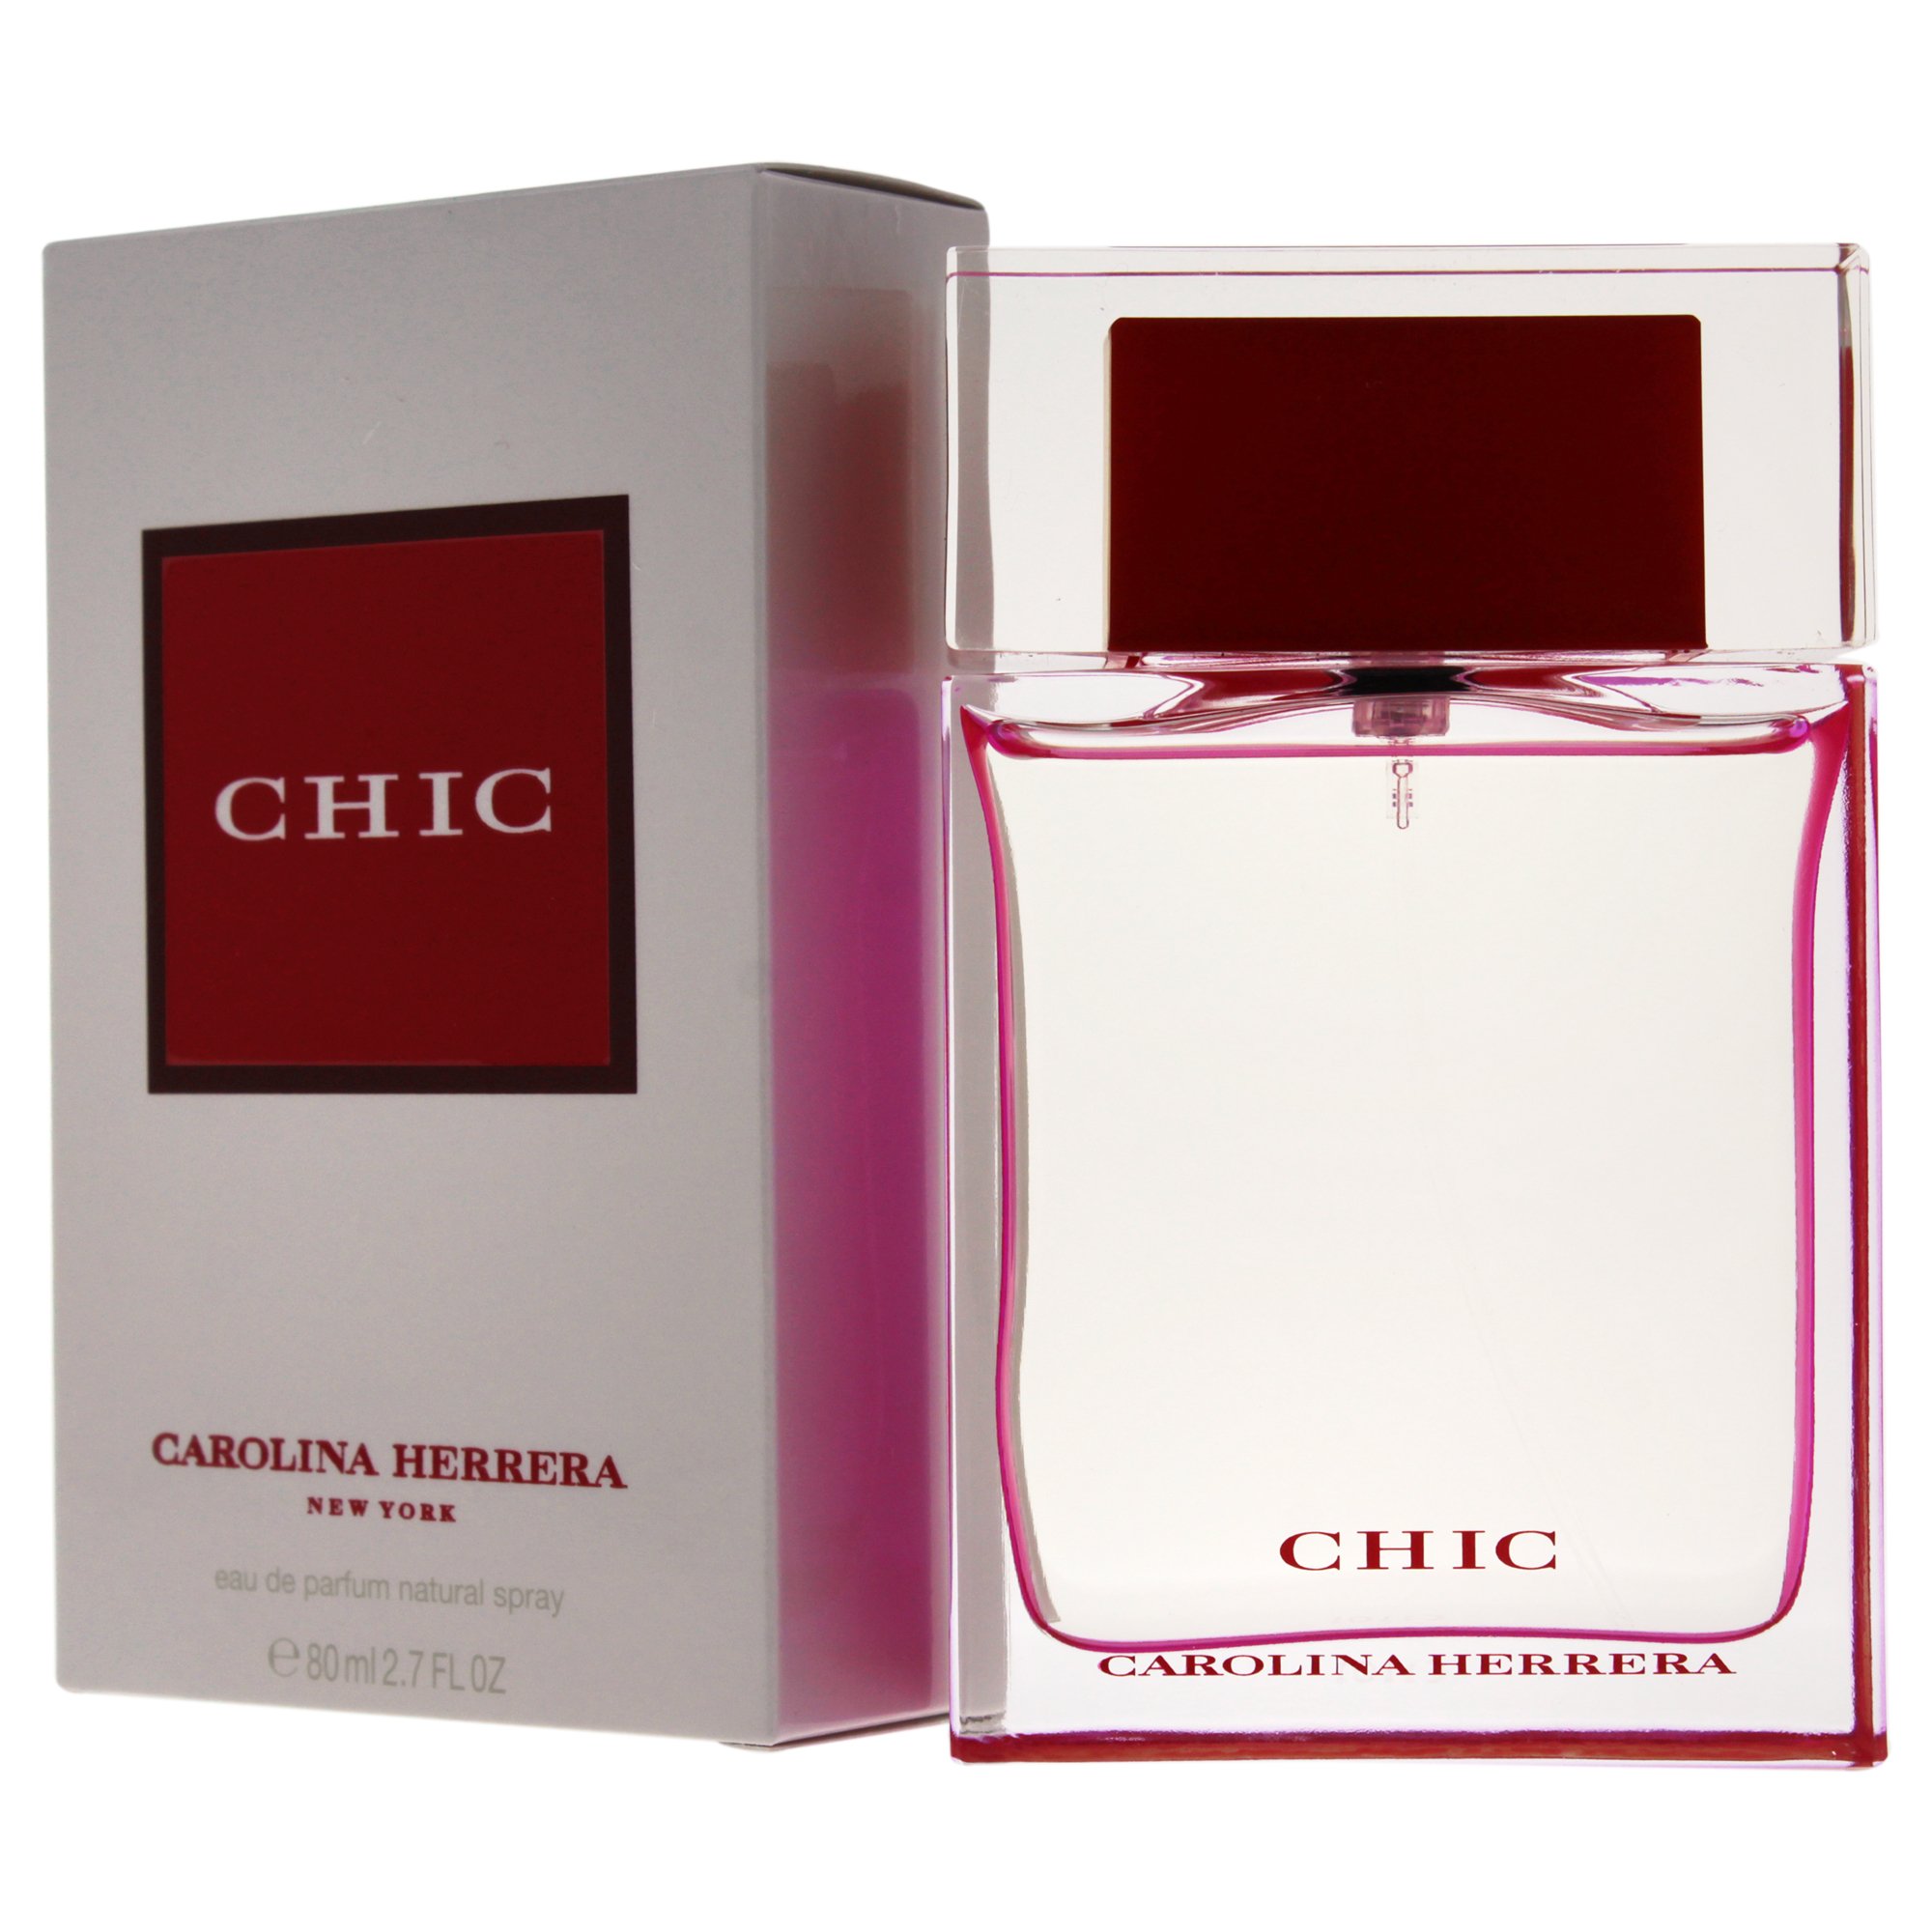 Carolina Herrera Chic Fragrance For Women - Light But Elegant - Top Notes Of Red Freesia And Tuberose - Middle Notes Of Freesia And Lily-Of-The-Valley - Base Notes Of White Musk - Edp Spray - 2.7 Oz